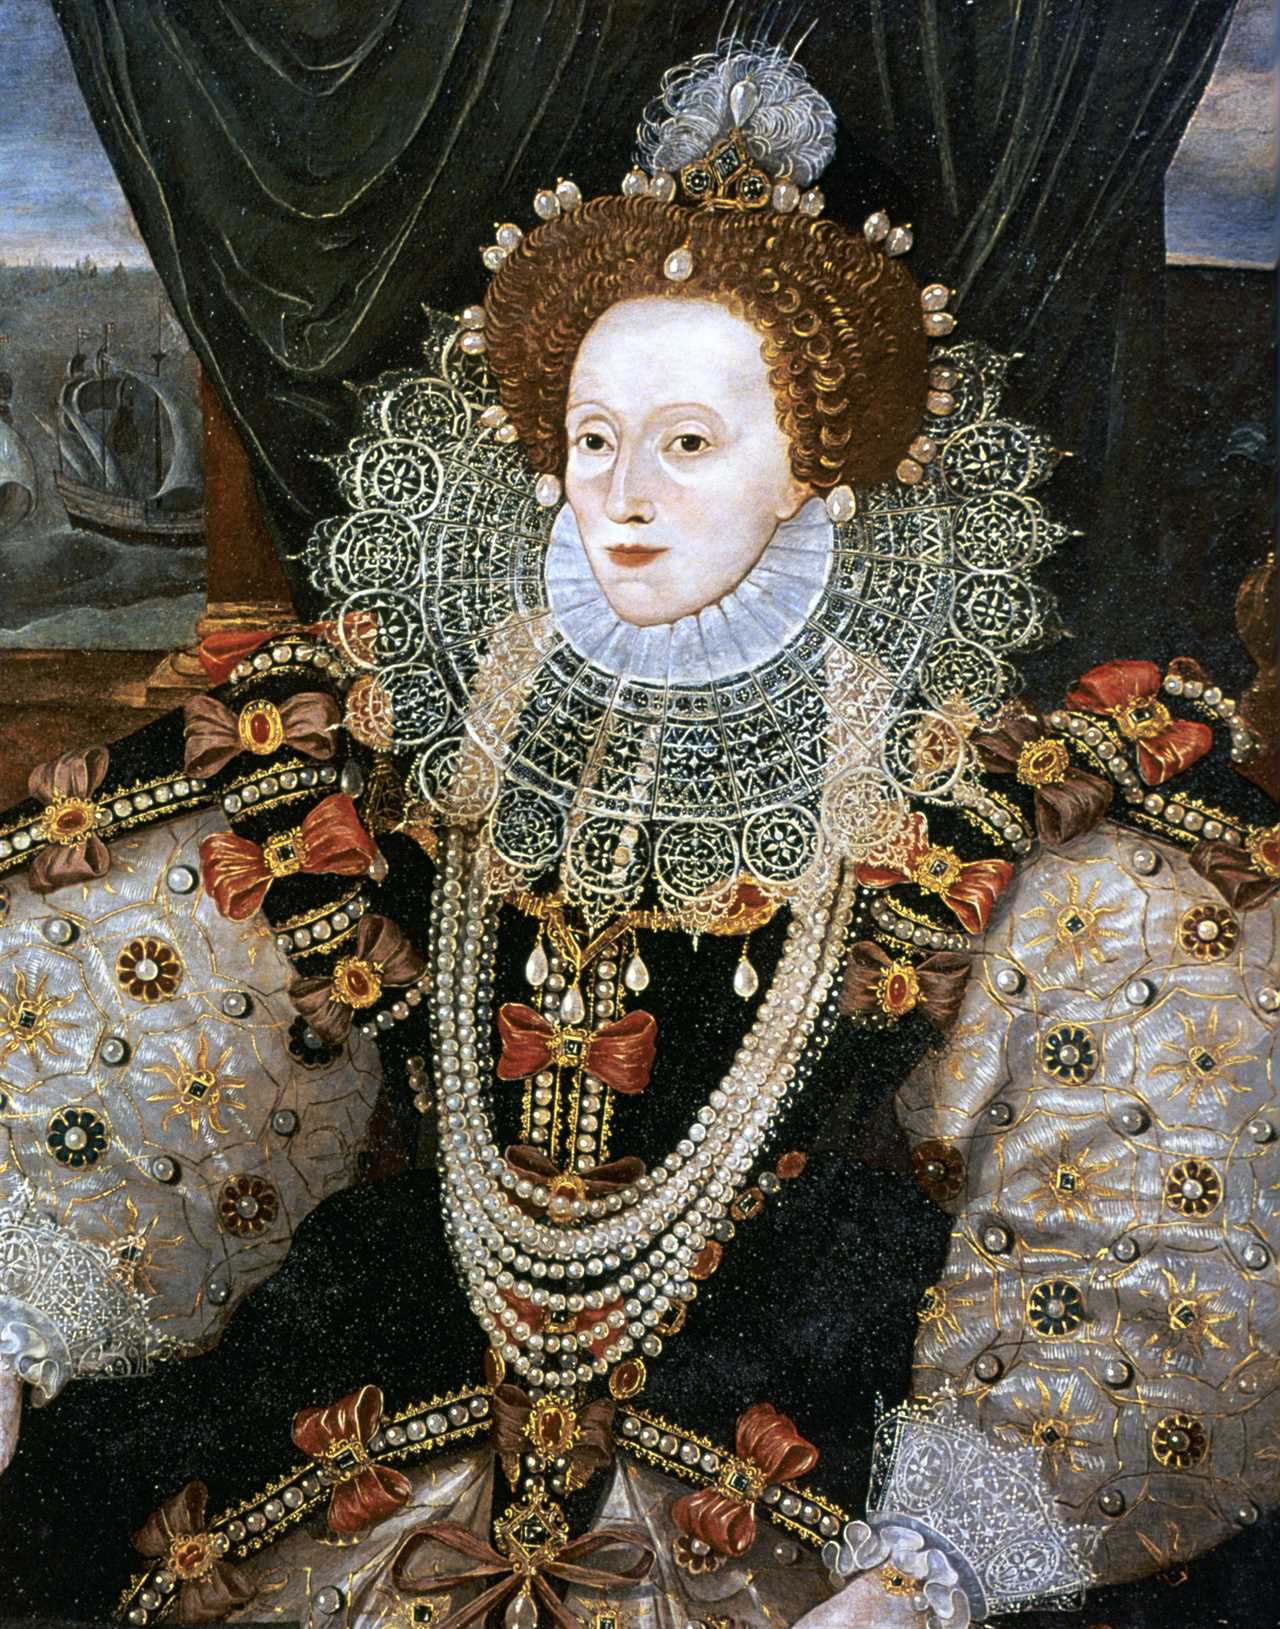 Queen Elizabeth I was the most powerful woman in history